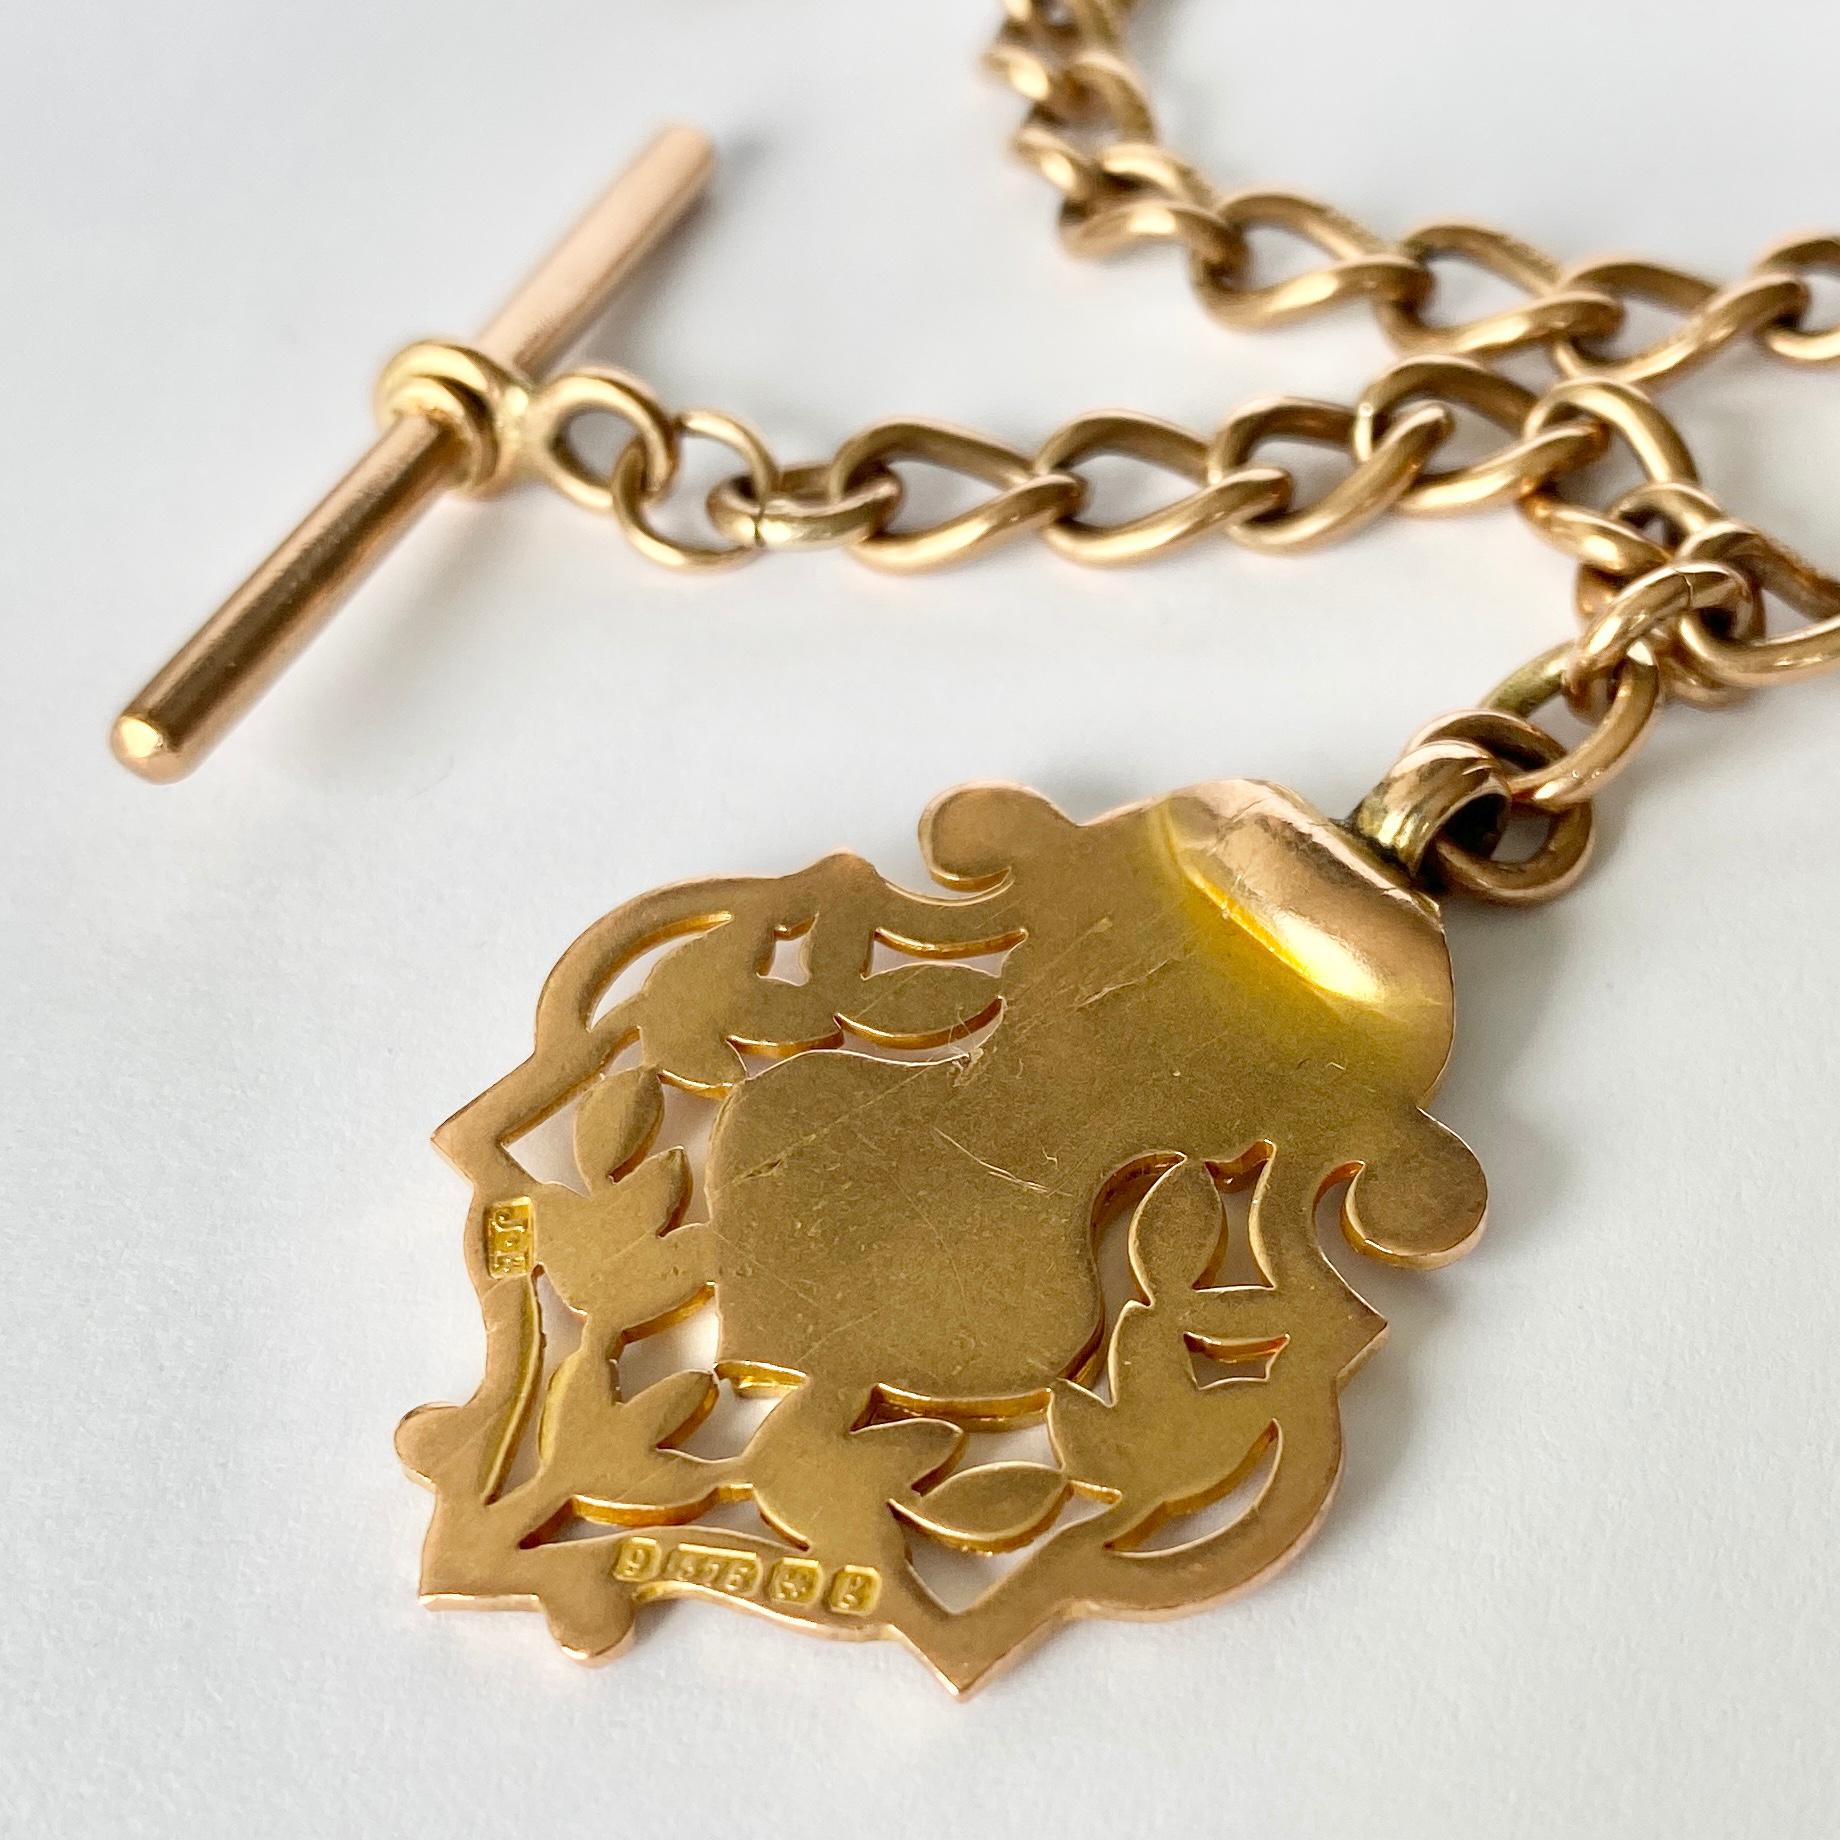 This 9carat gold albert chain is the perfect addition to any gents wardrobe or can be worn as a necklace and has a dog clip on one end and a t-bar at the other. The Albert also has a medal fully hallmarked Birmingham 1907.

Length: 37cm
Link Width: